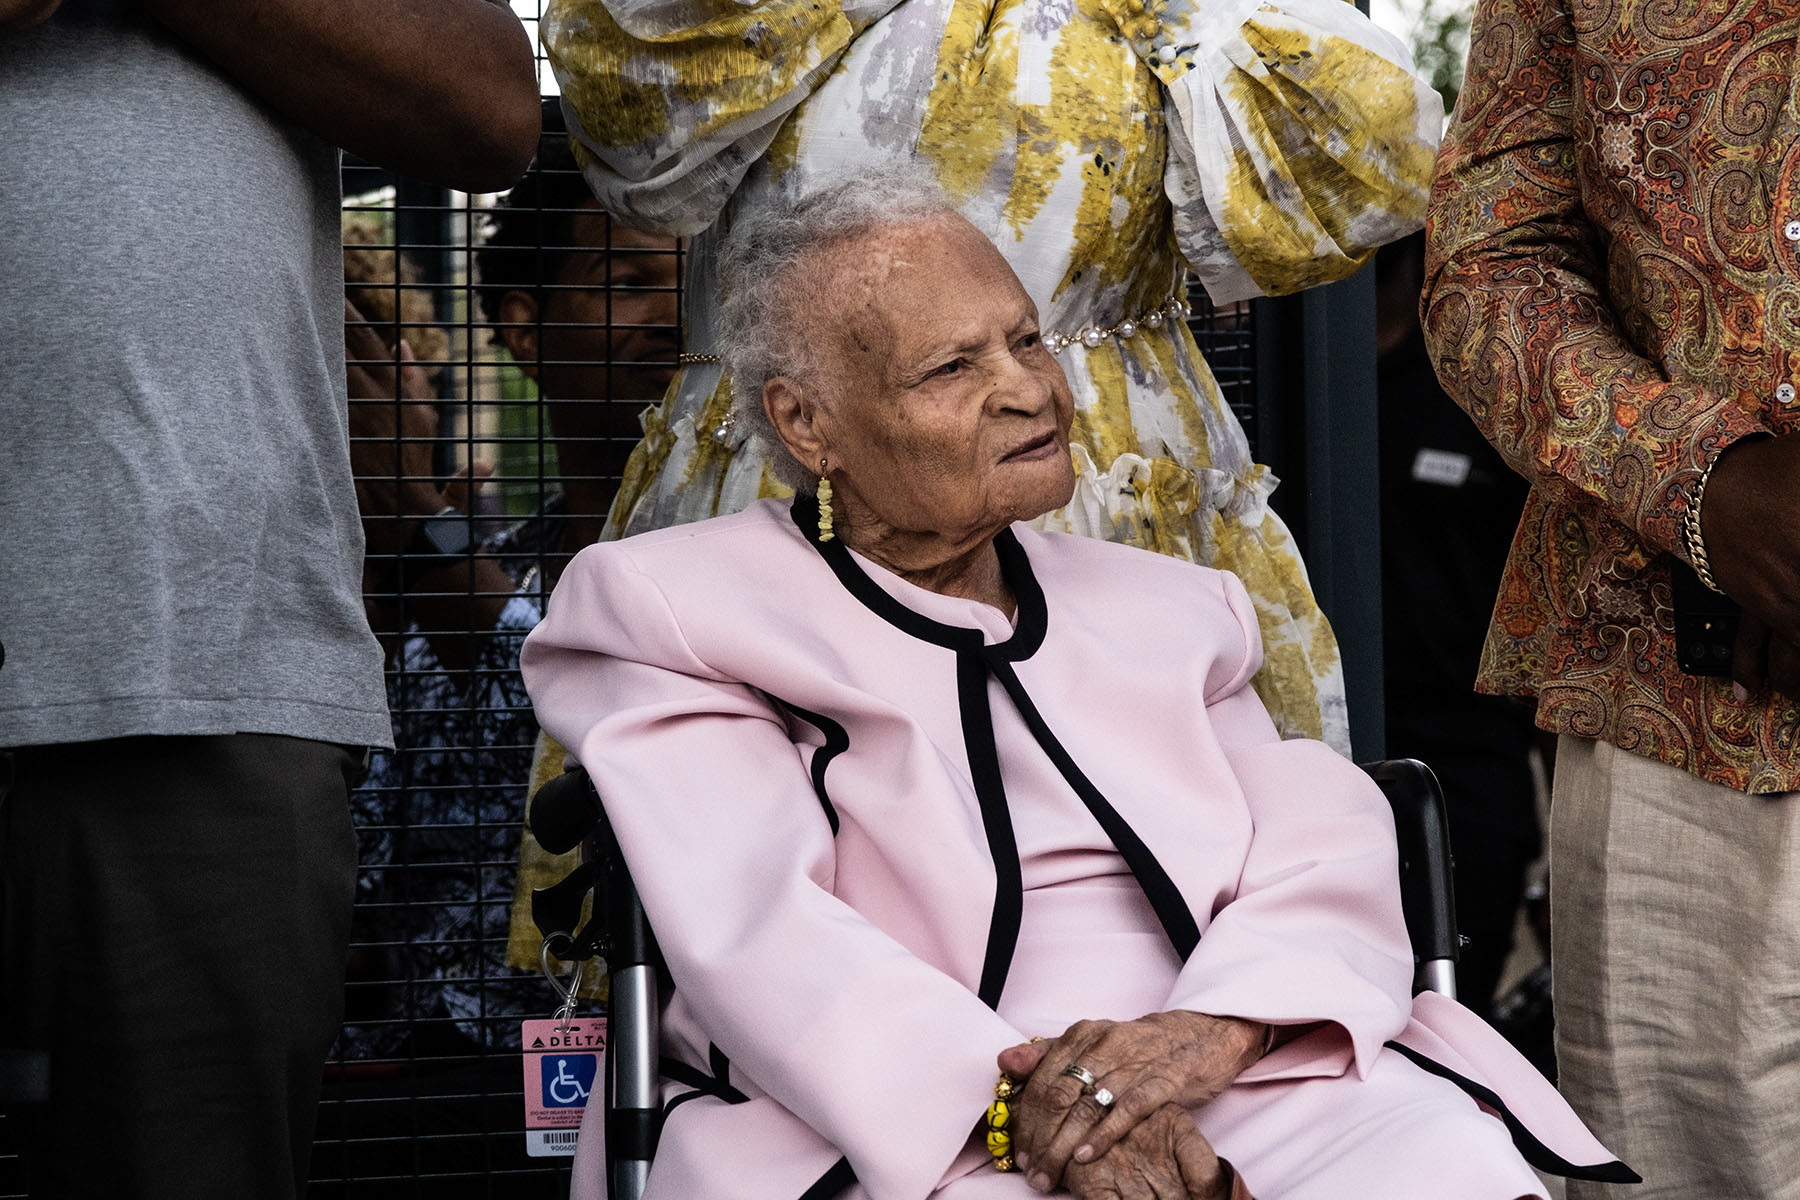 Viola Fletcher sits in her wheelchair during an event honoring survivors of the Tulsa Massacre.